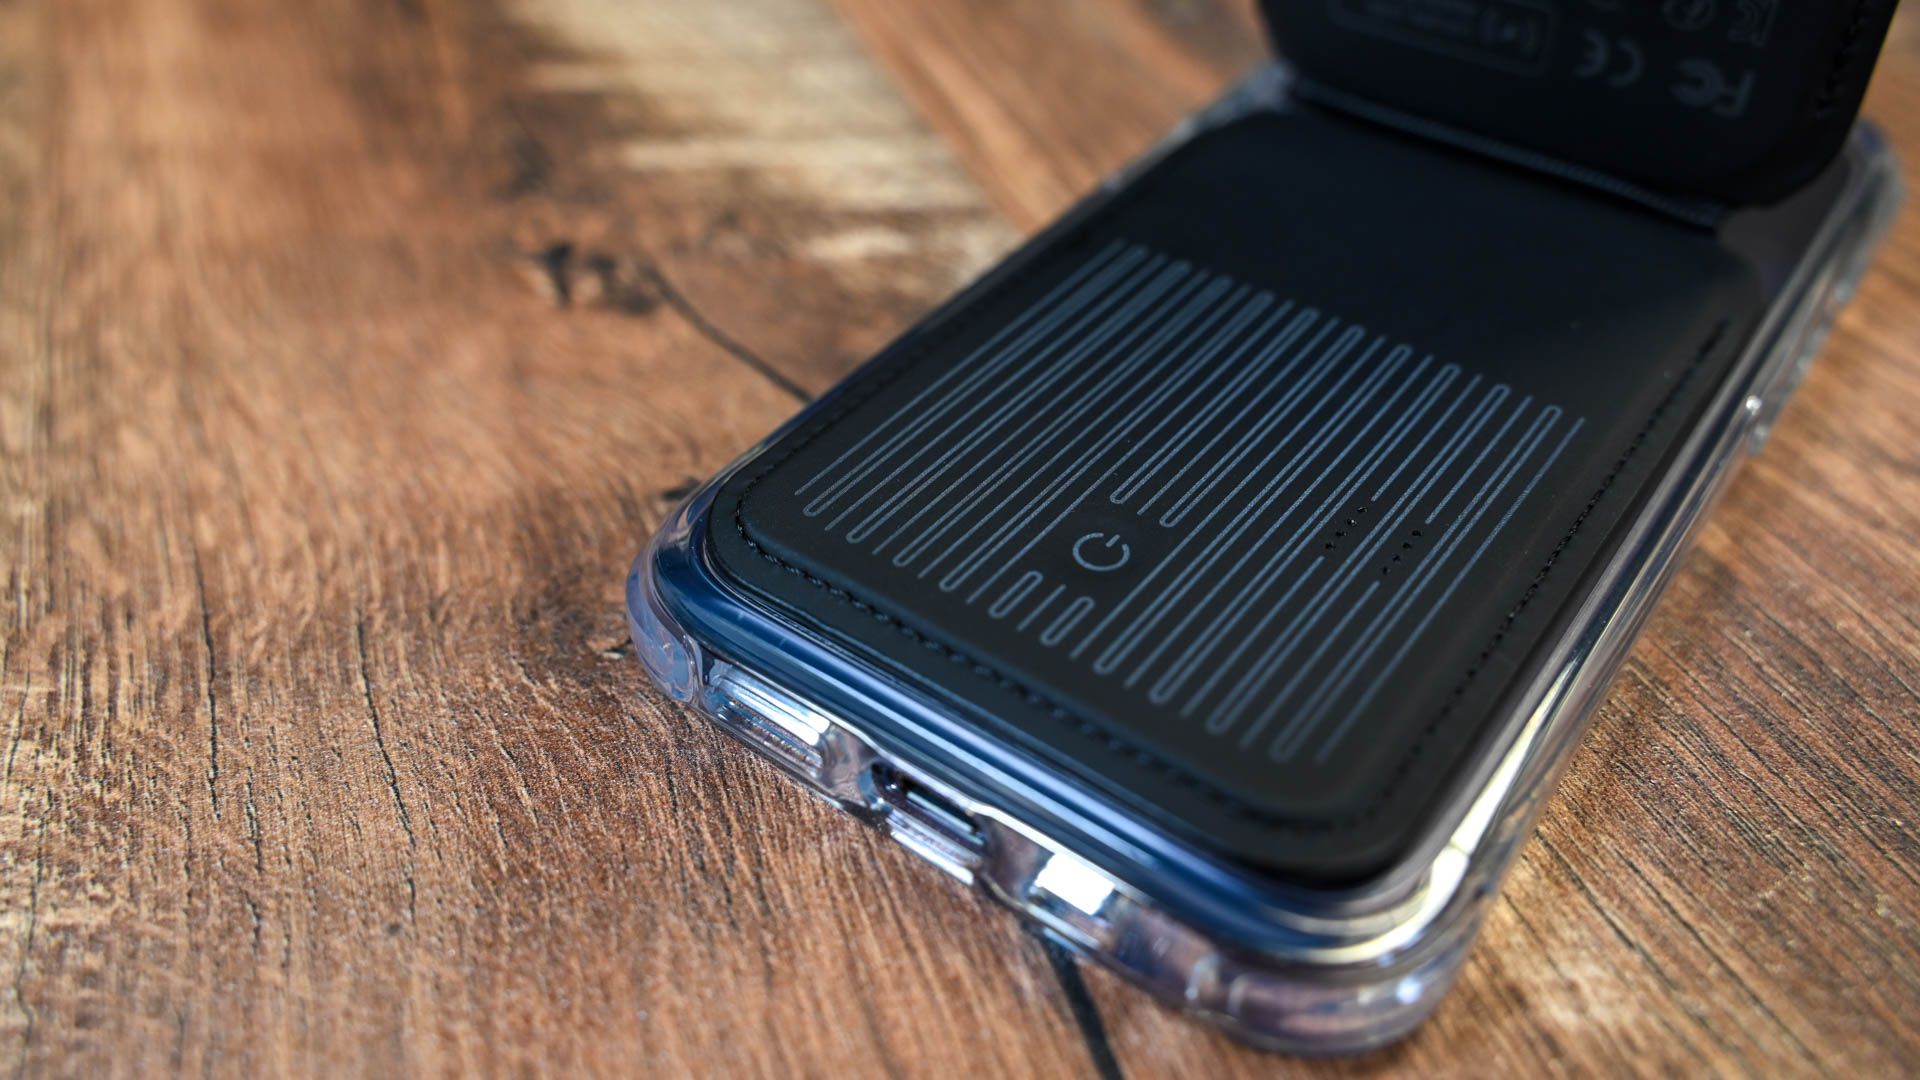 ESR Debuts MagSafe-Compatible HaloLock Geo Wallet Stand With Find